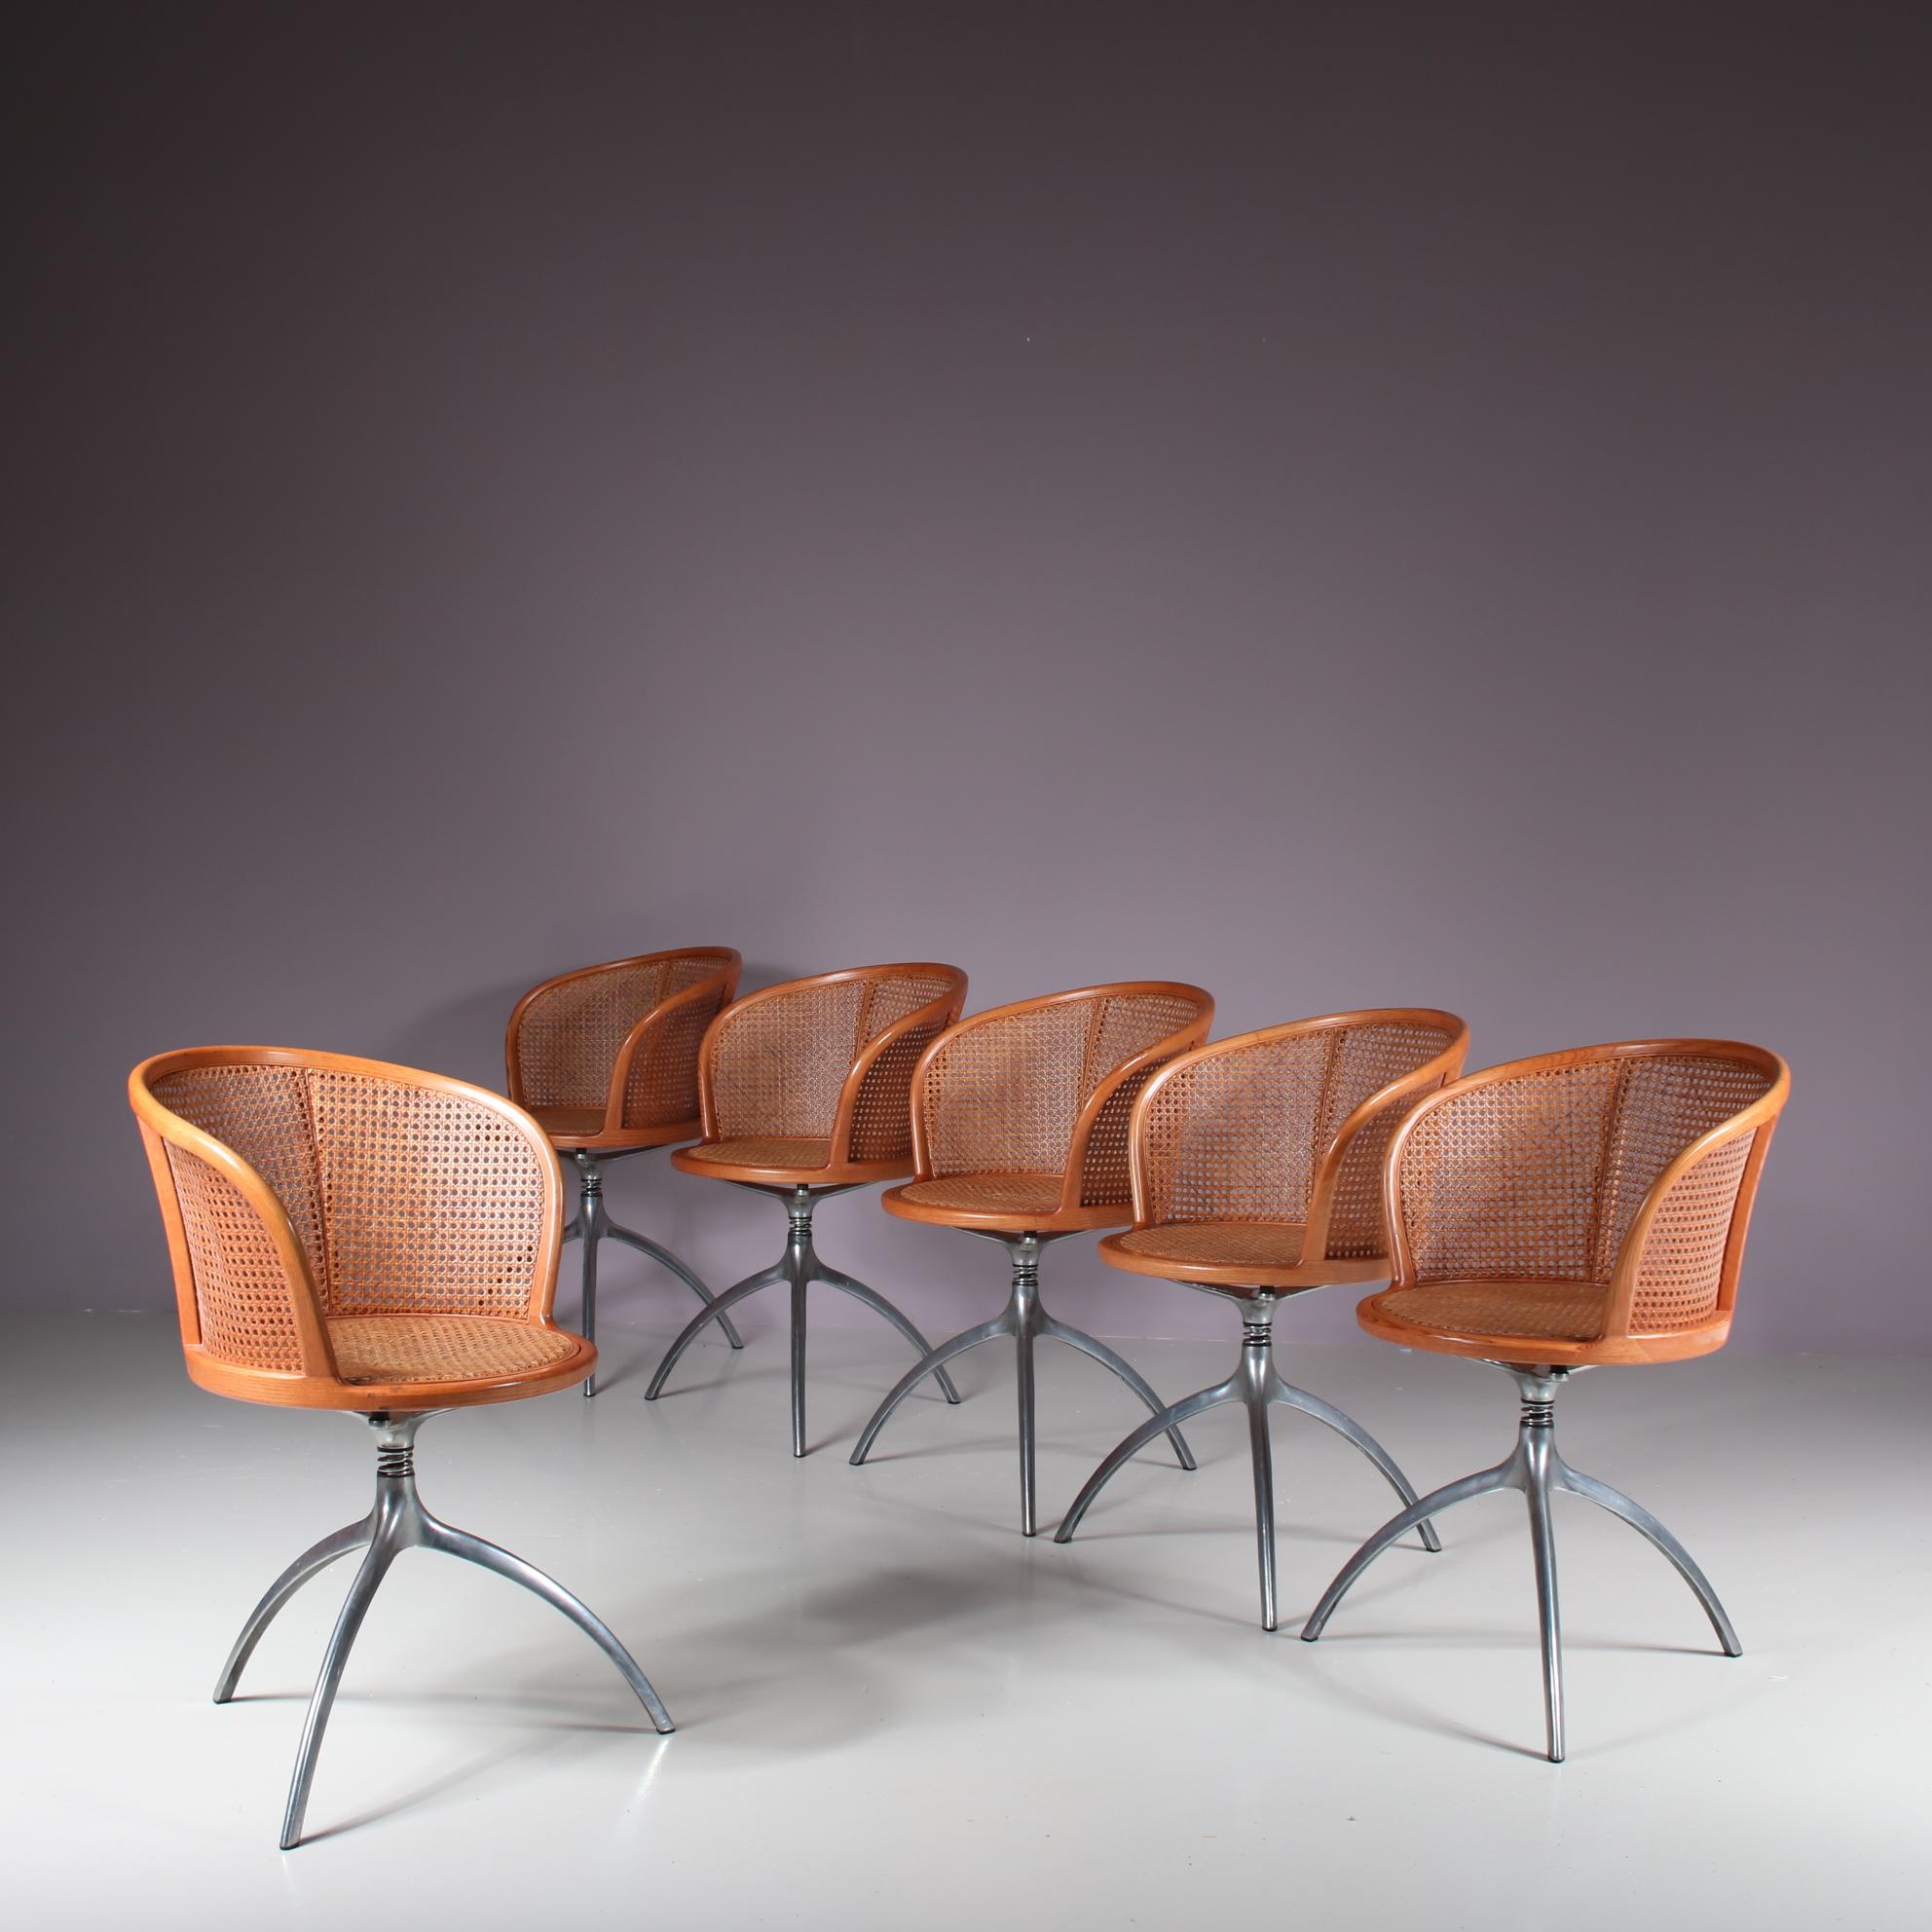 Italian Set of 6 “Young Lady” Chairs by Paolo Rizzatto for Alias, Italy 1990 For Sale